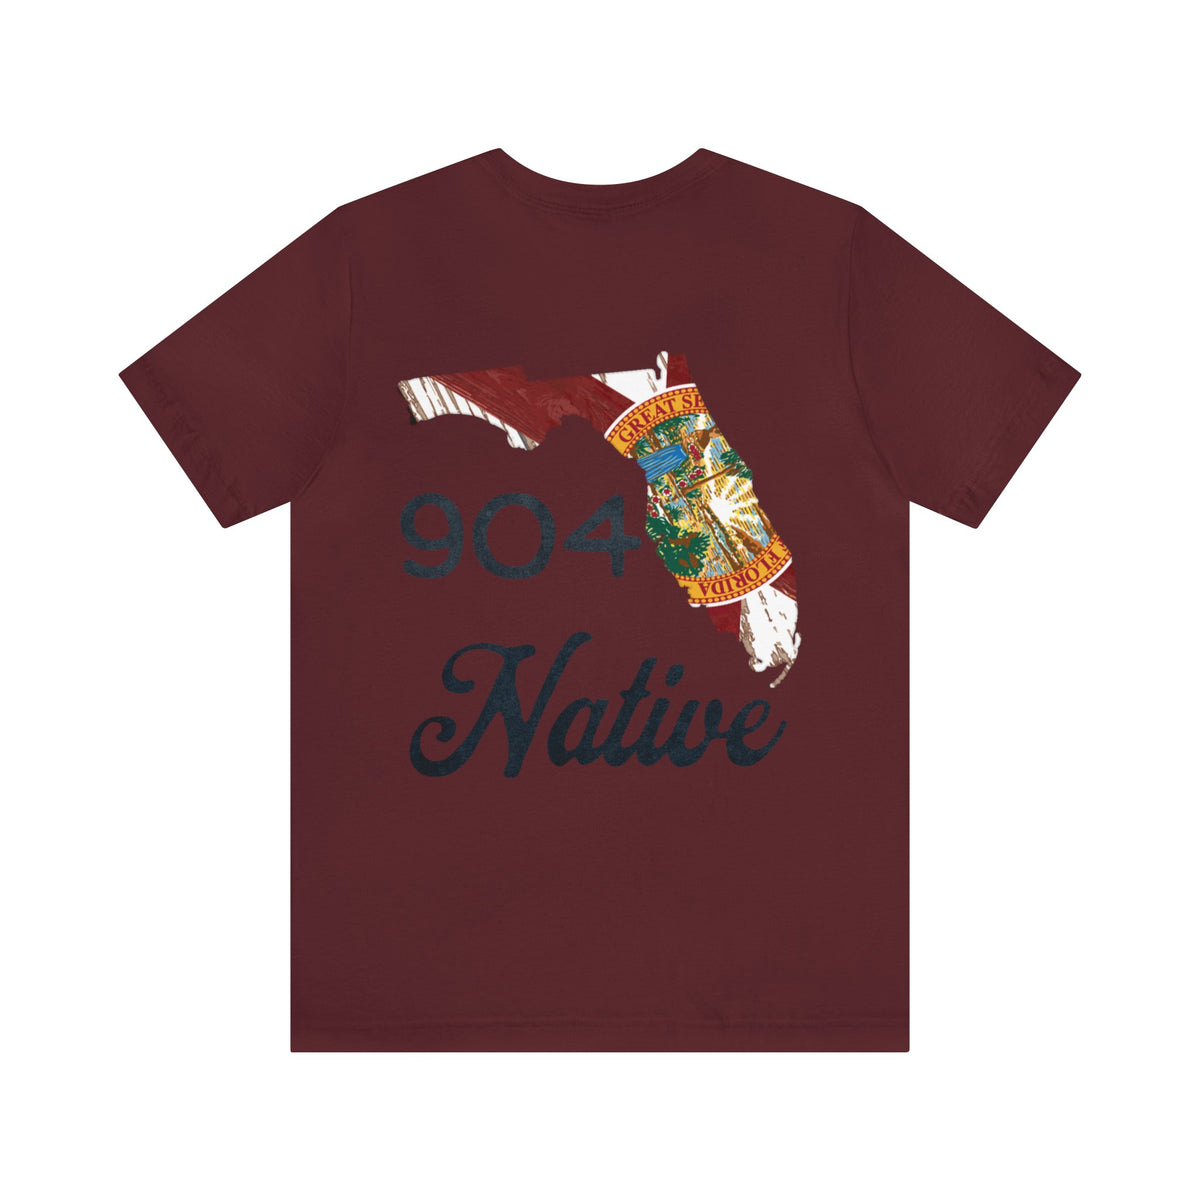 904 Native Series Women's Classic-Fit Tee